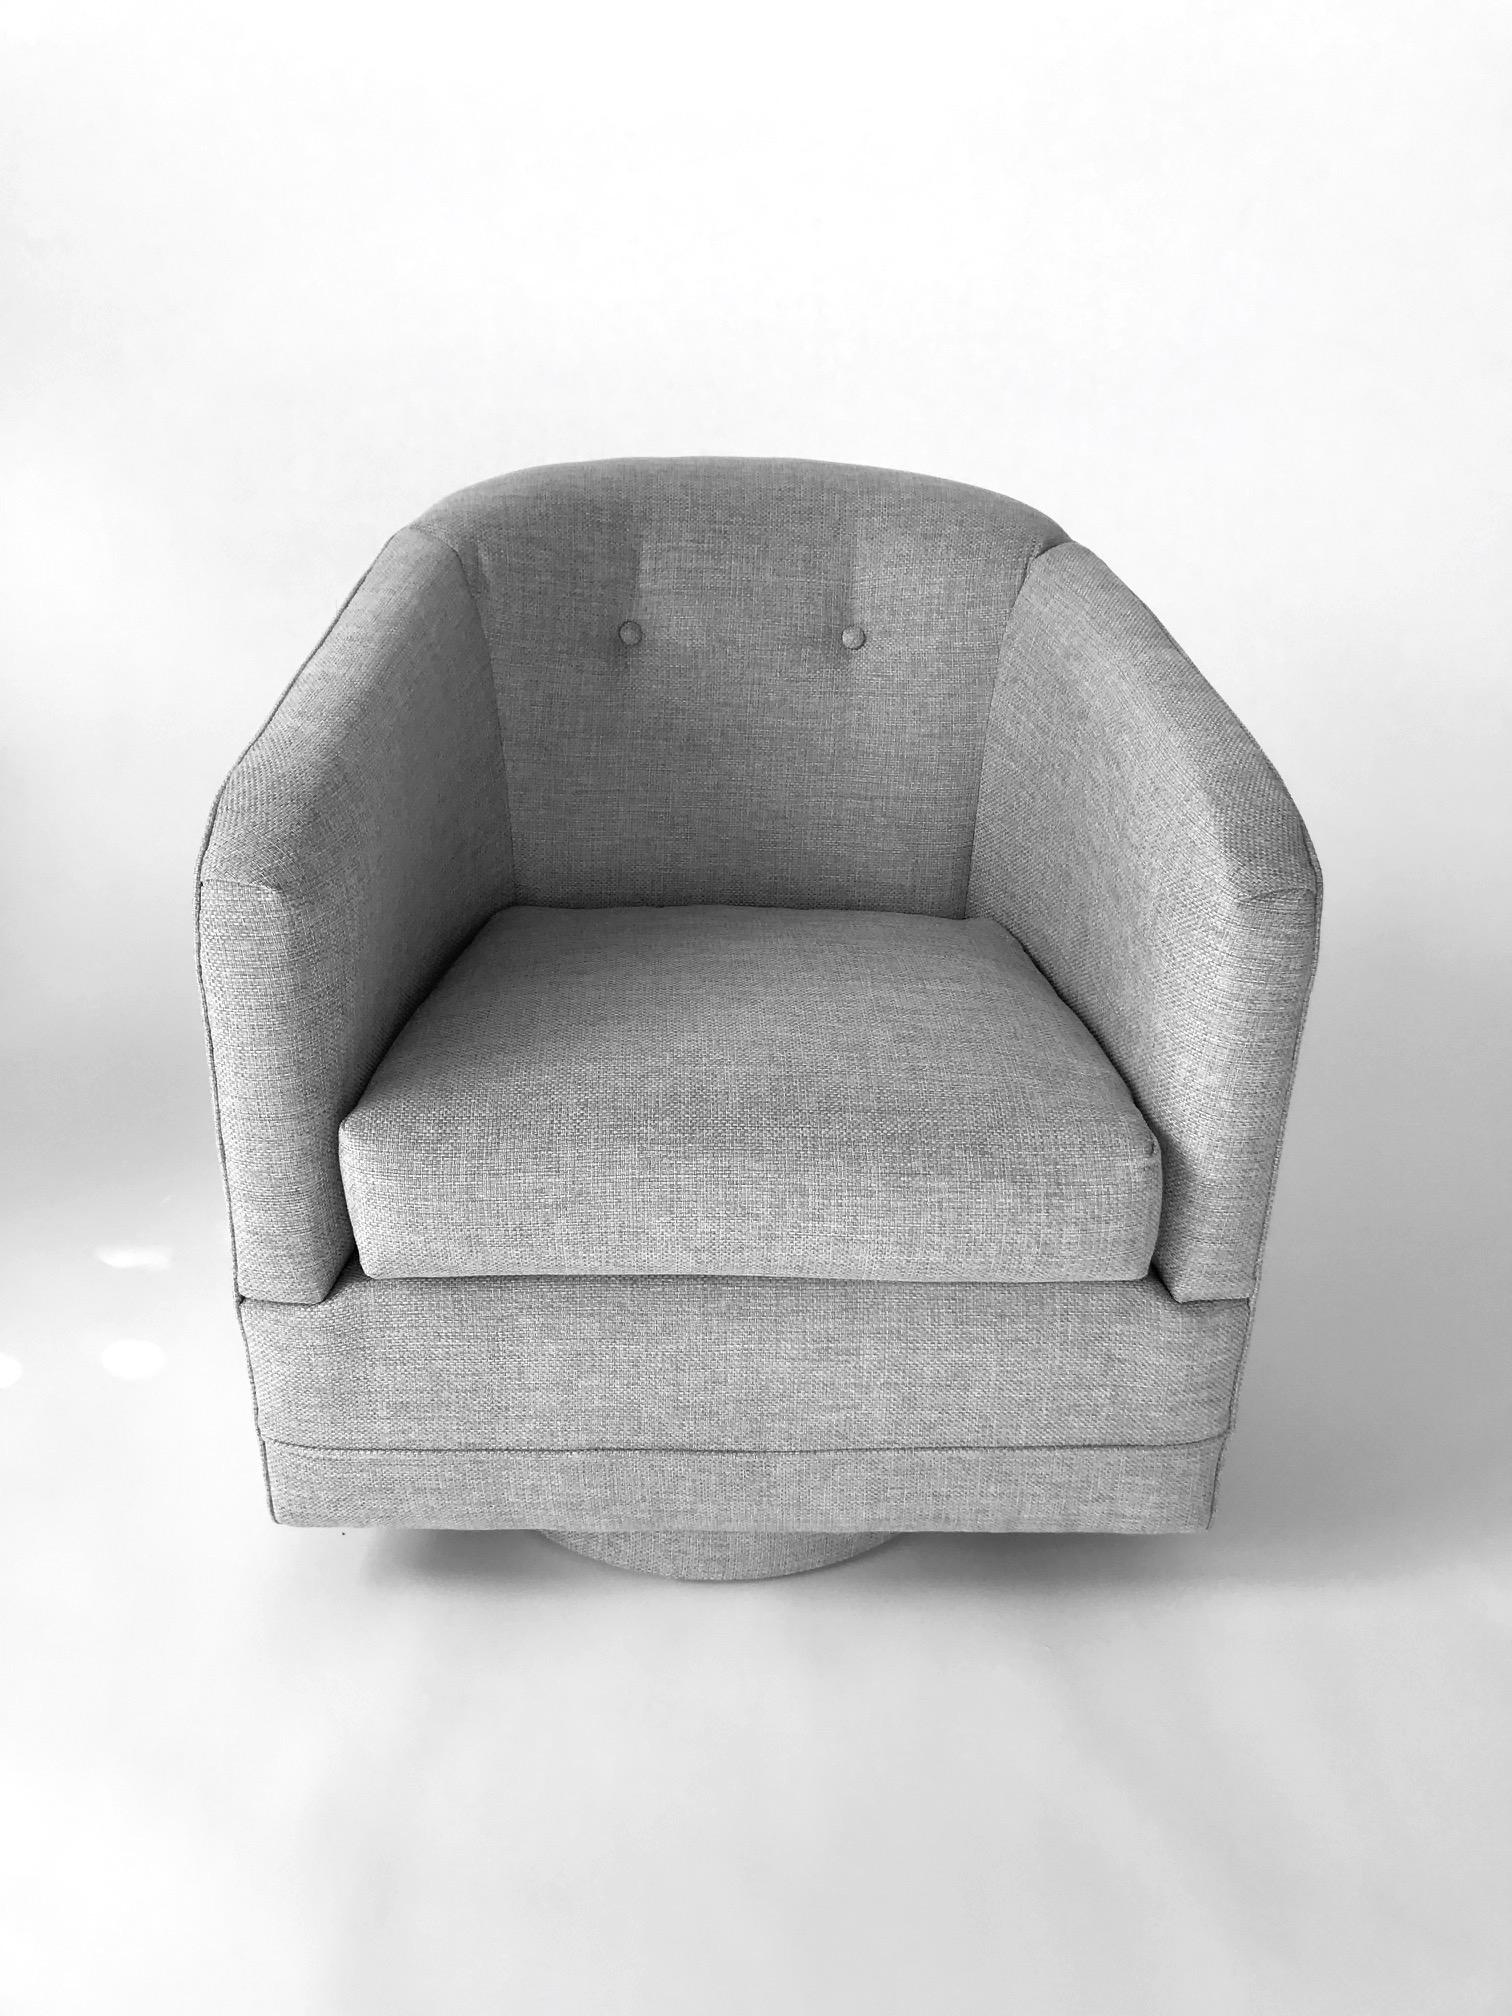 1970s Woven Upholstered Swivel Lounge Chair by Milo Baughman 4